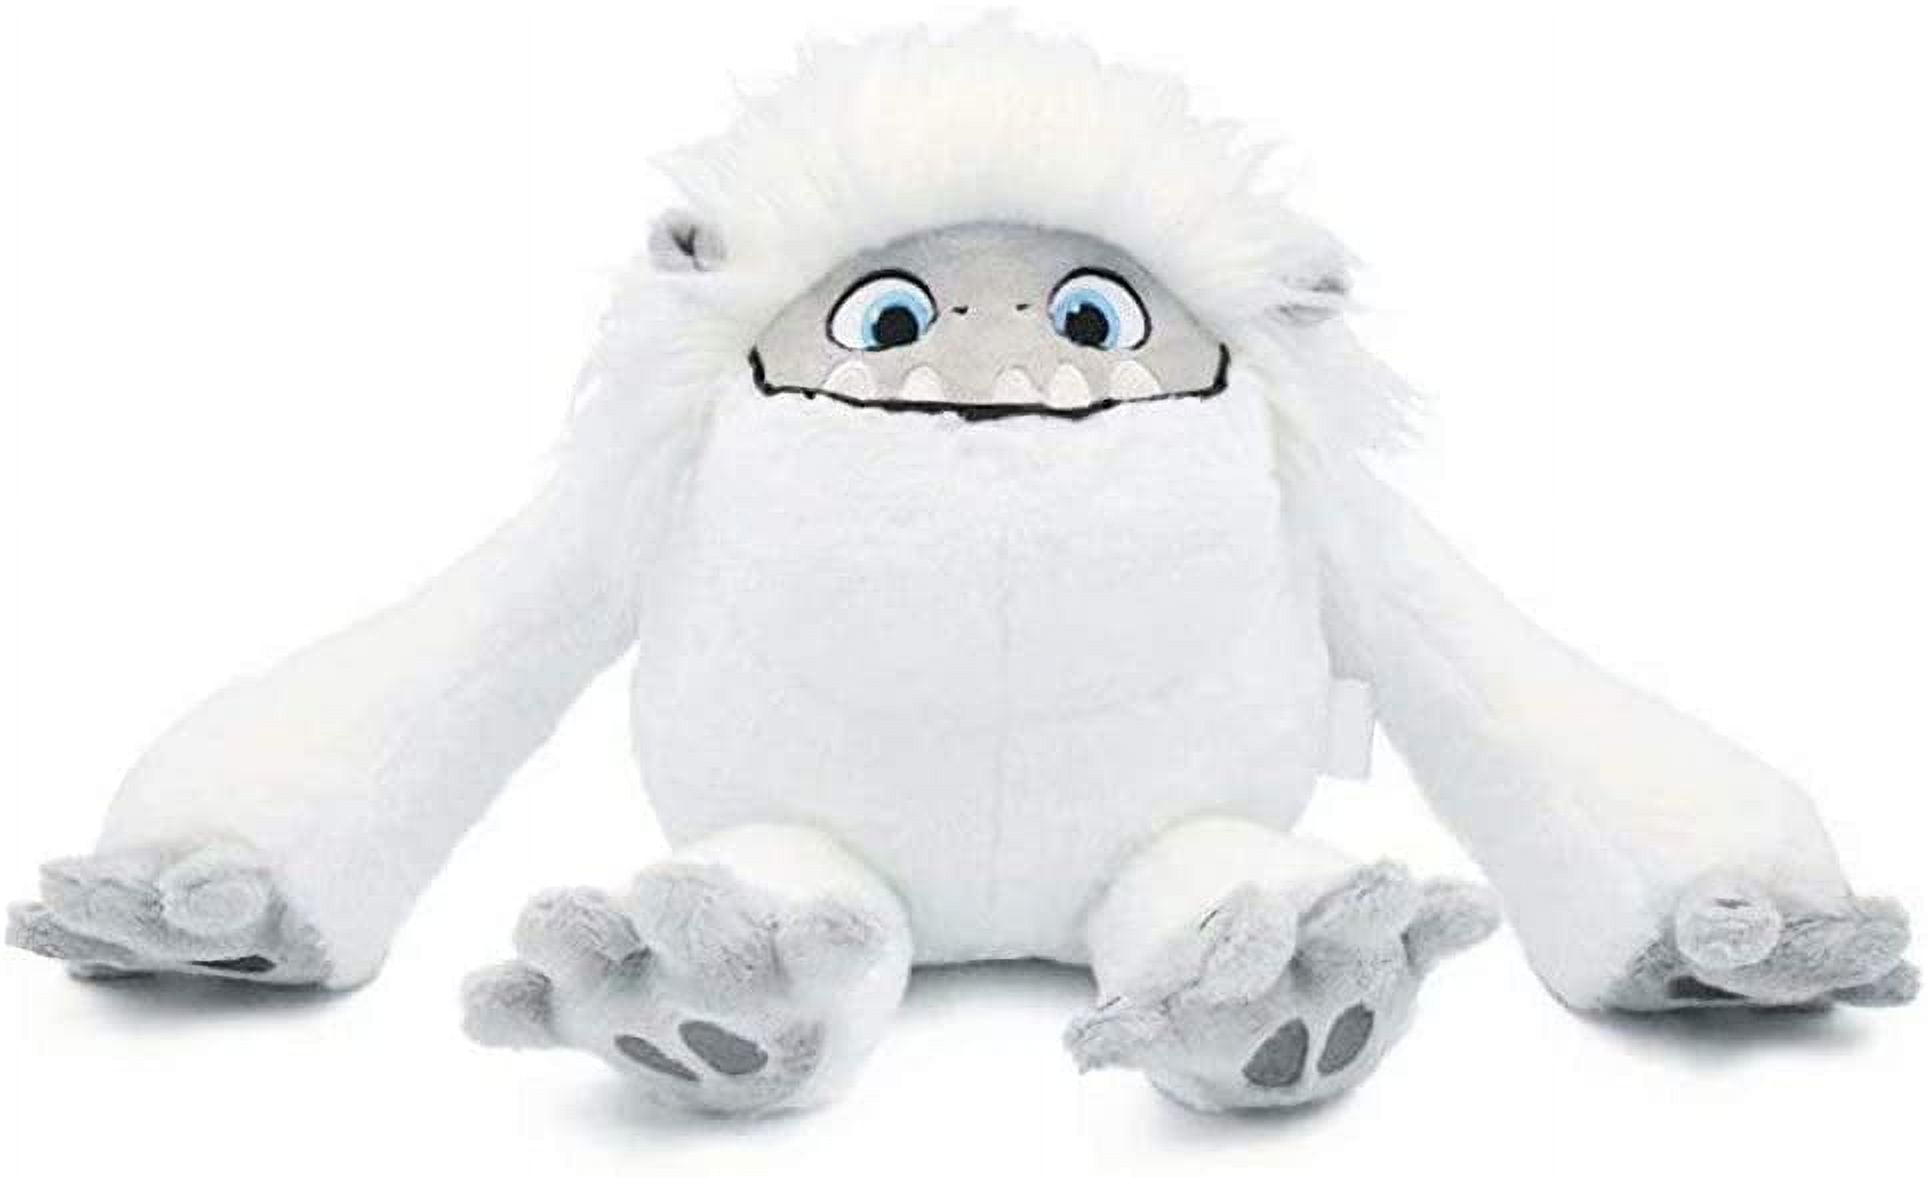 Snow Plush Cute Anime Doll Toys - Holiday Party Favor Gift